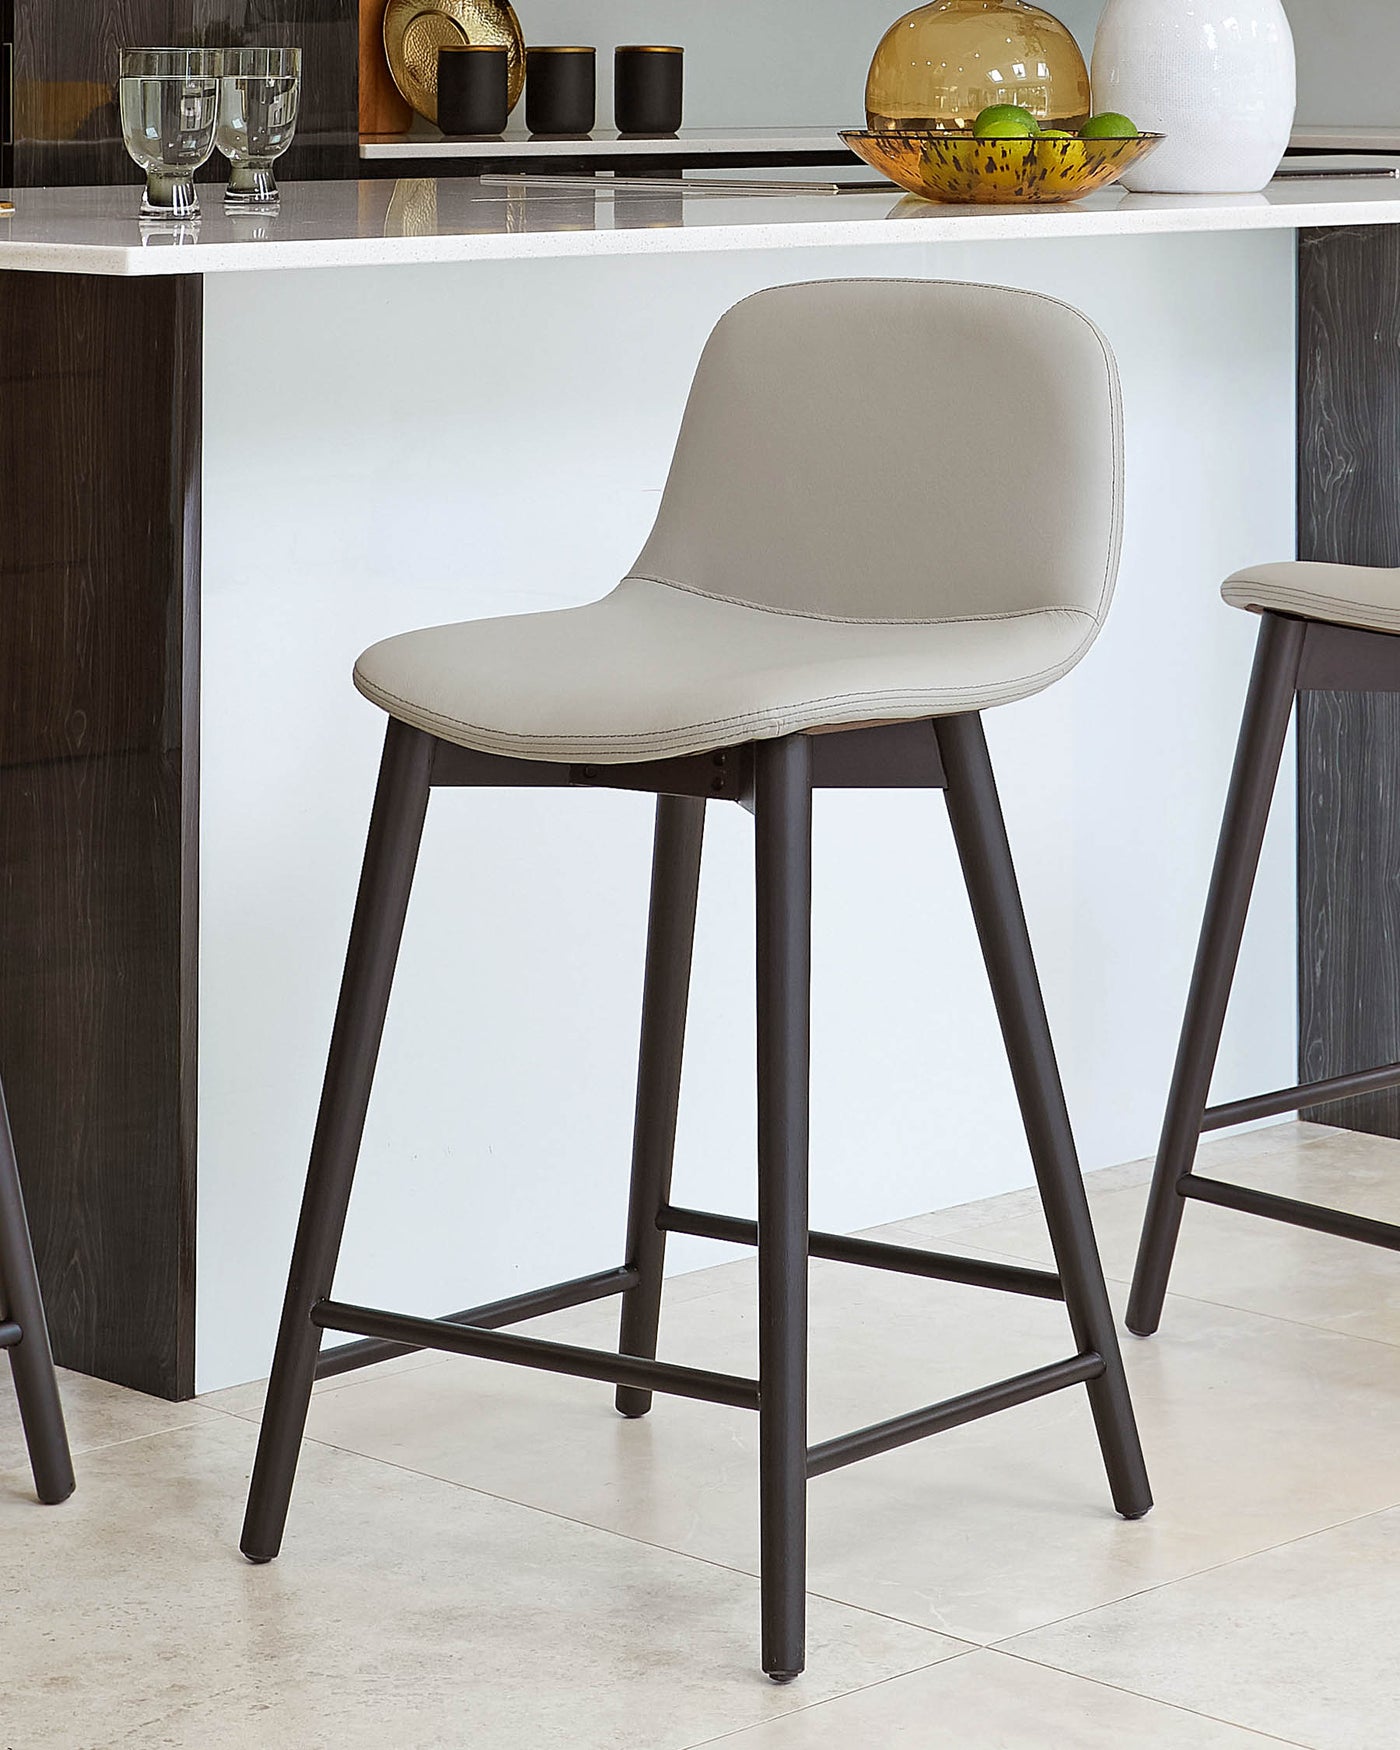 Modern bar stool with a light grey upholstered seat and backrest, mounted on a minimalist, angled, four-legged black metal frame.